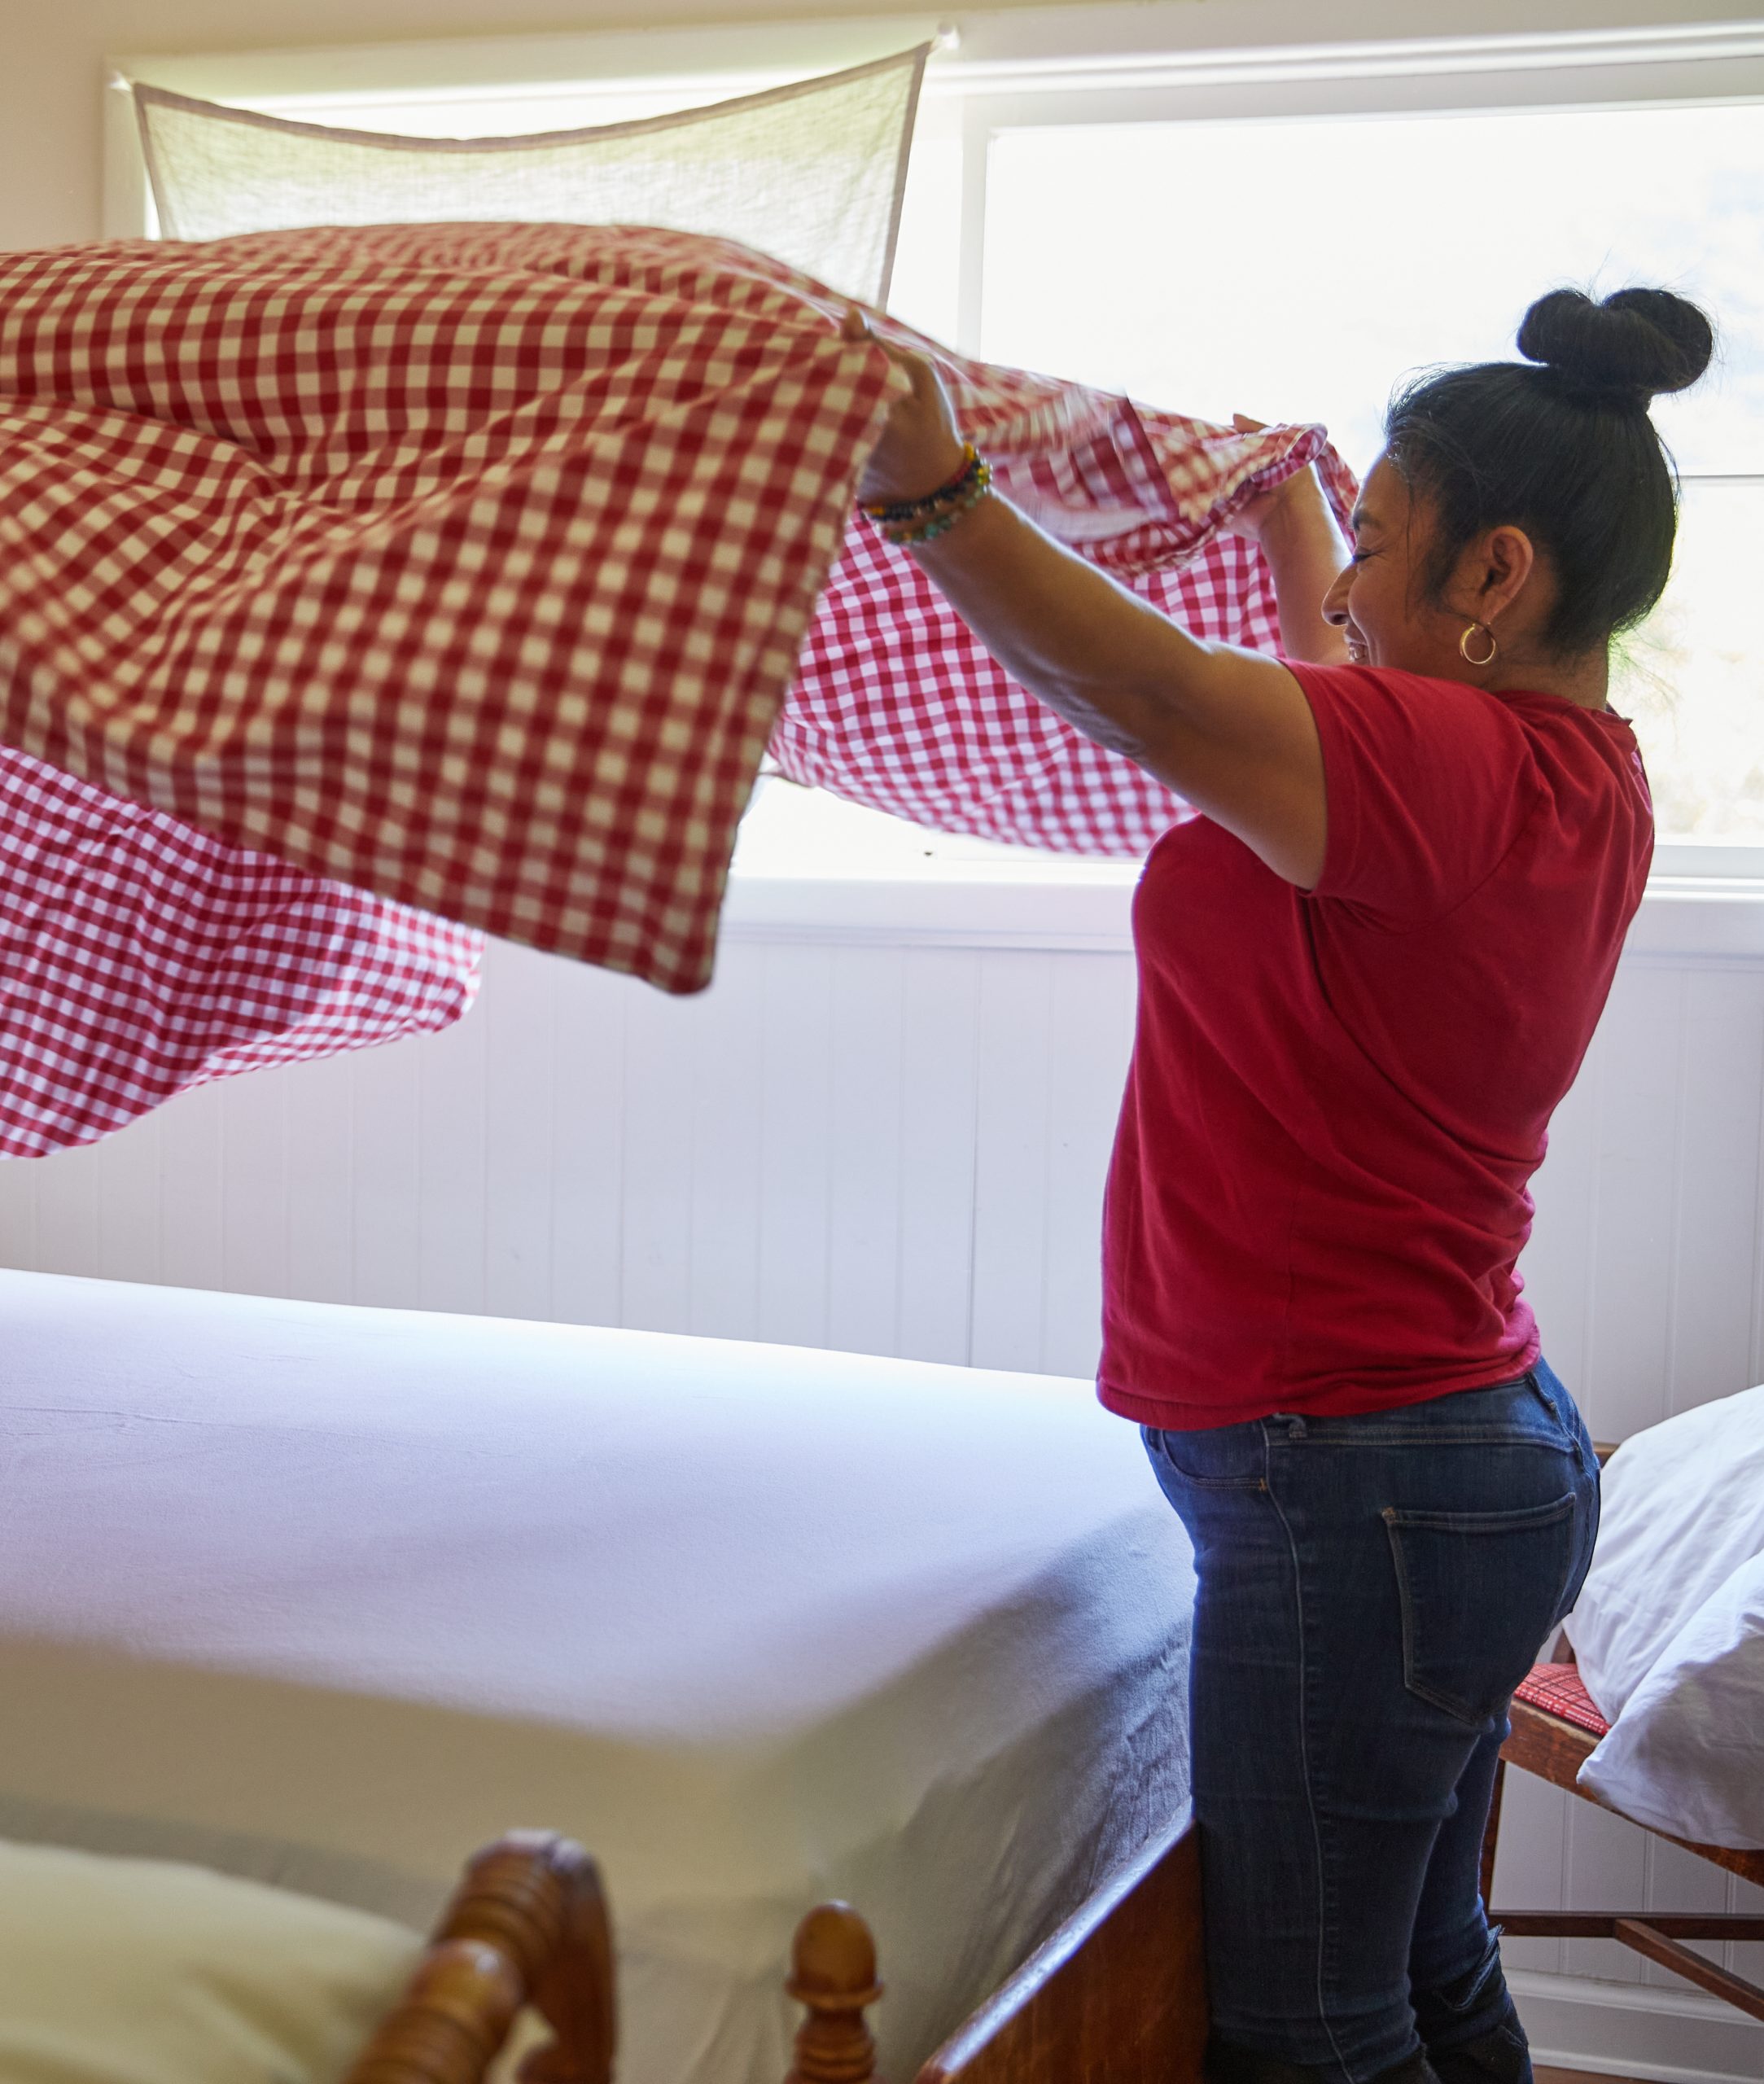 Karla, our head housekeeper making the bed